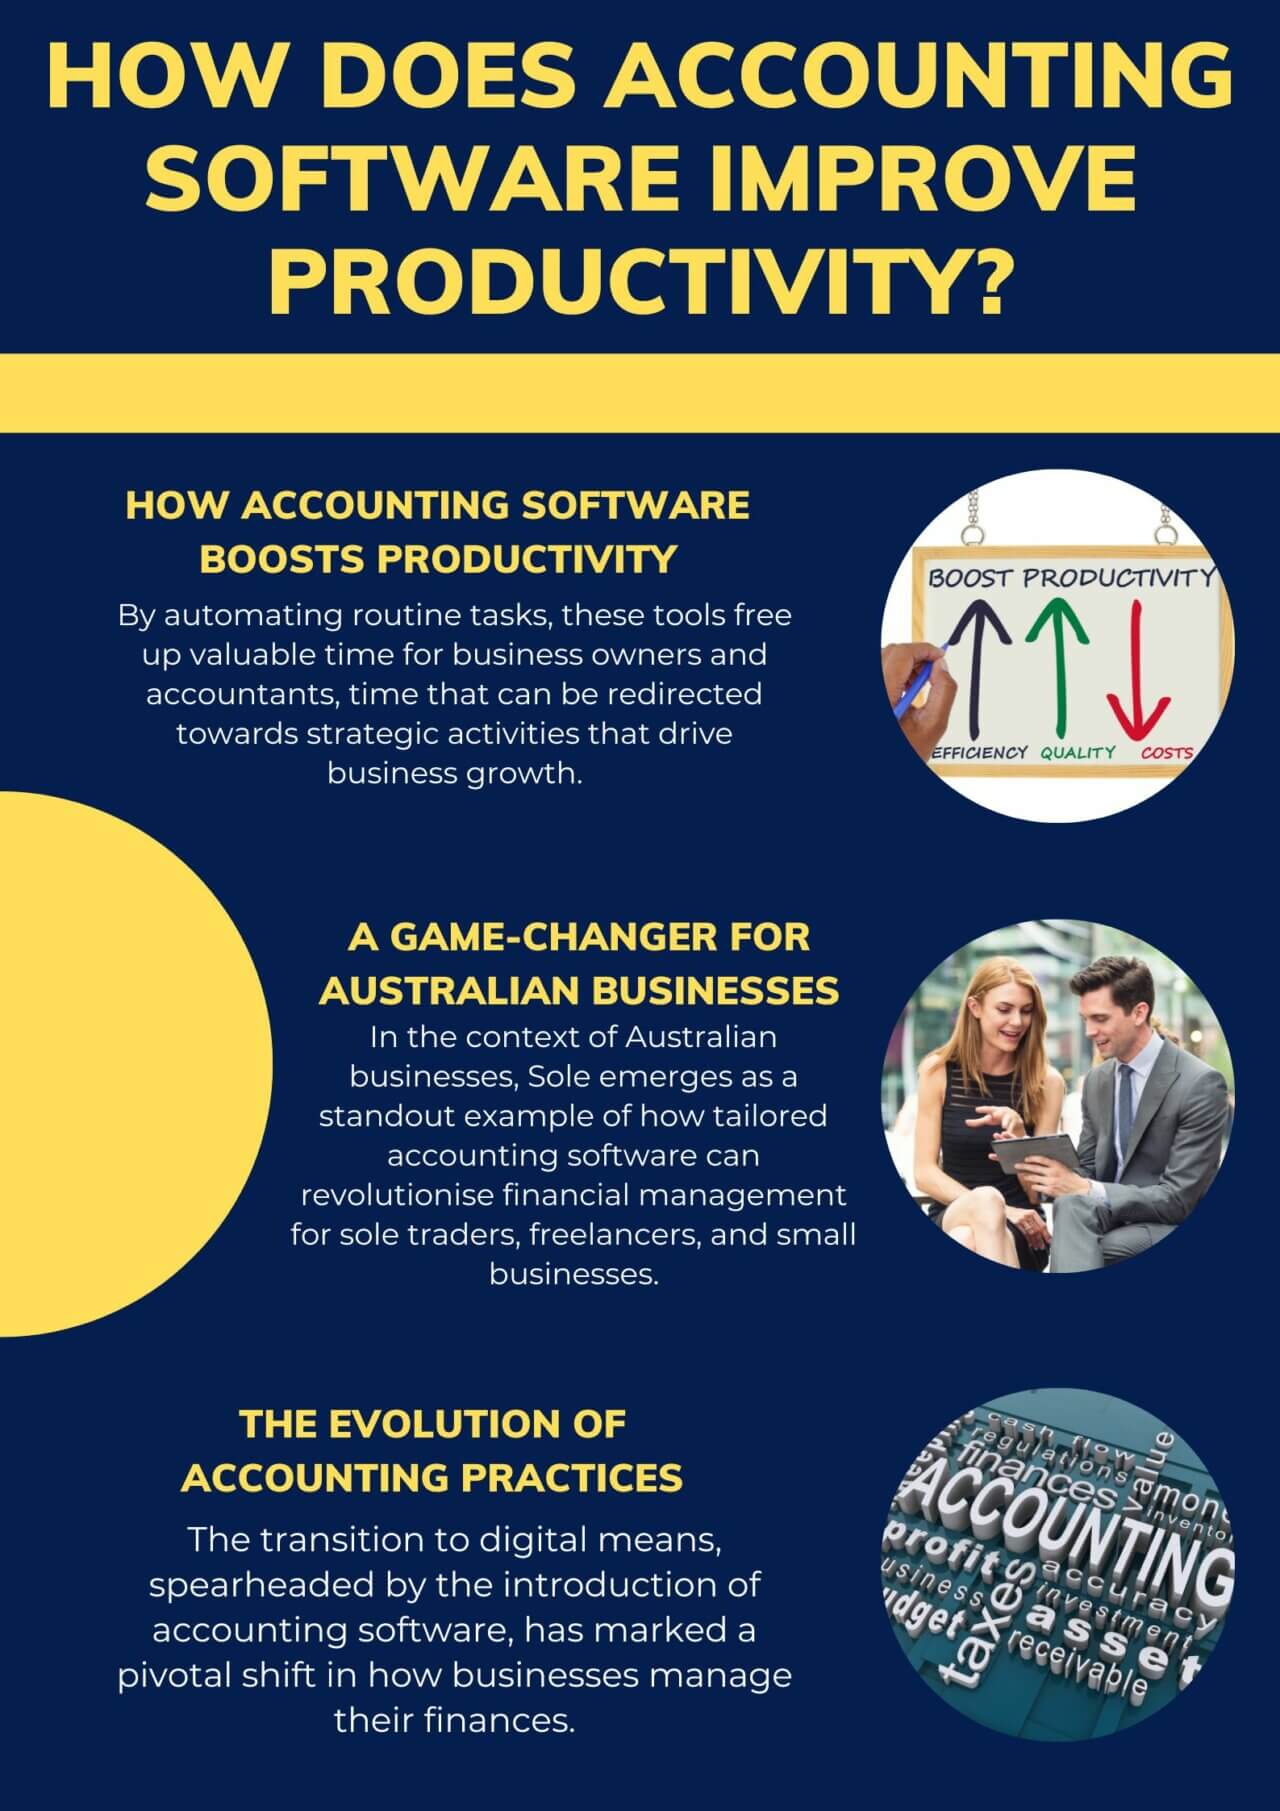 How Does Accounting Software Improve Productivity(1)